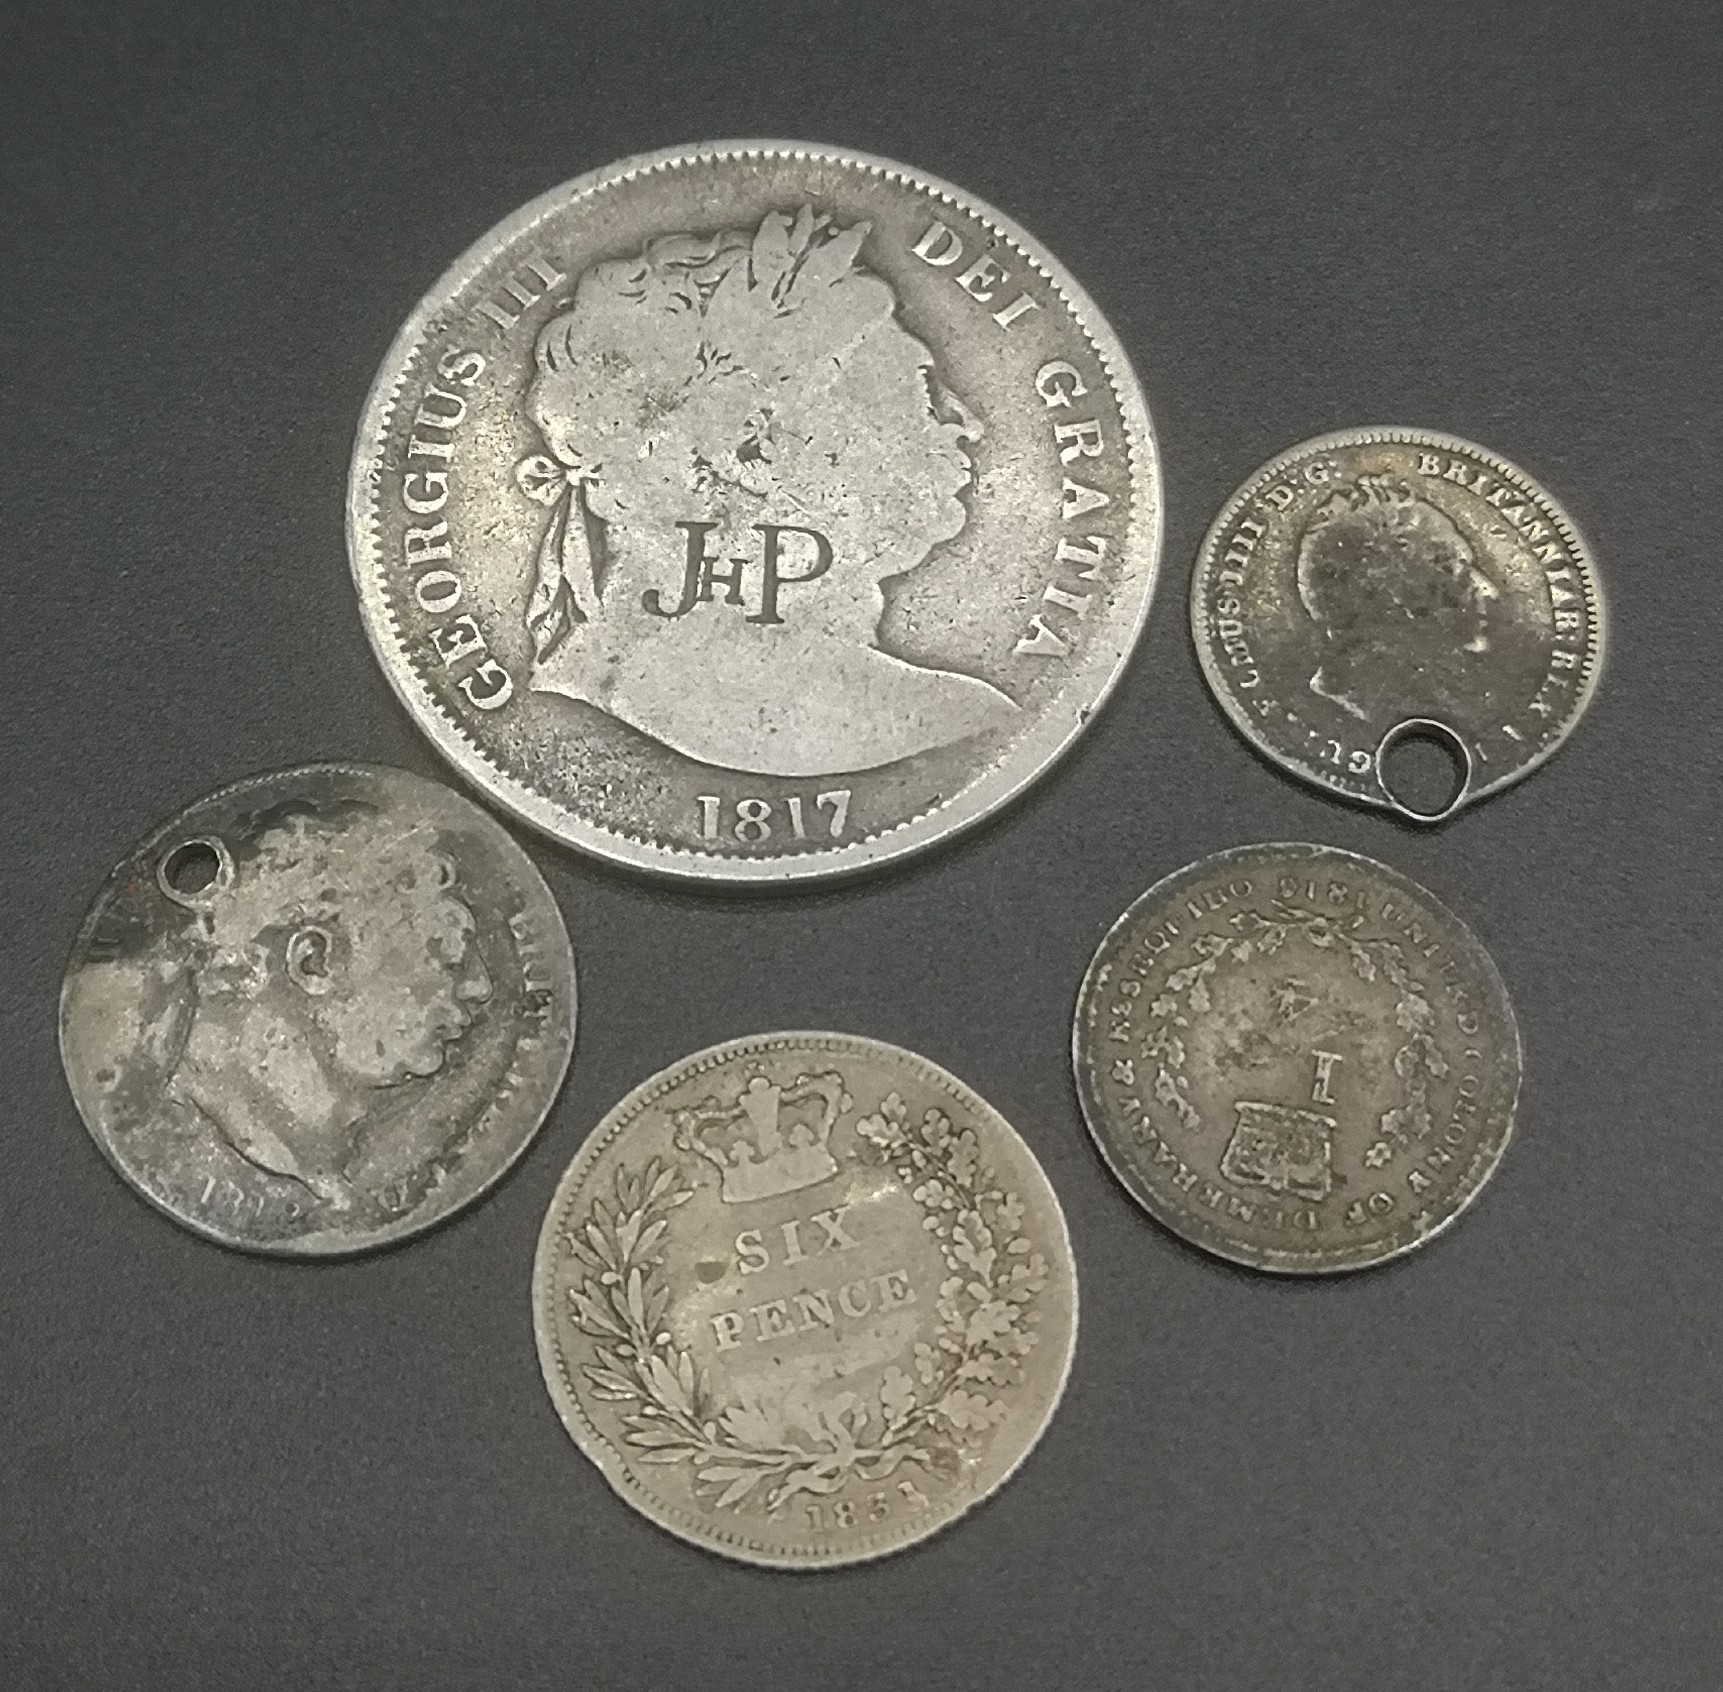 Three King George III coins and two King George IV - Image 2 of 7